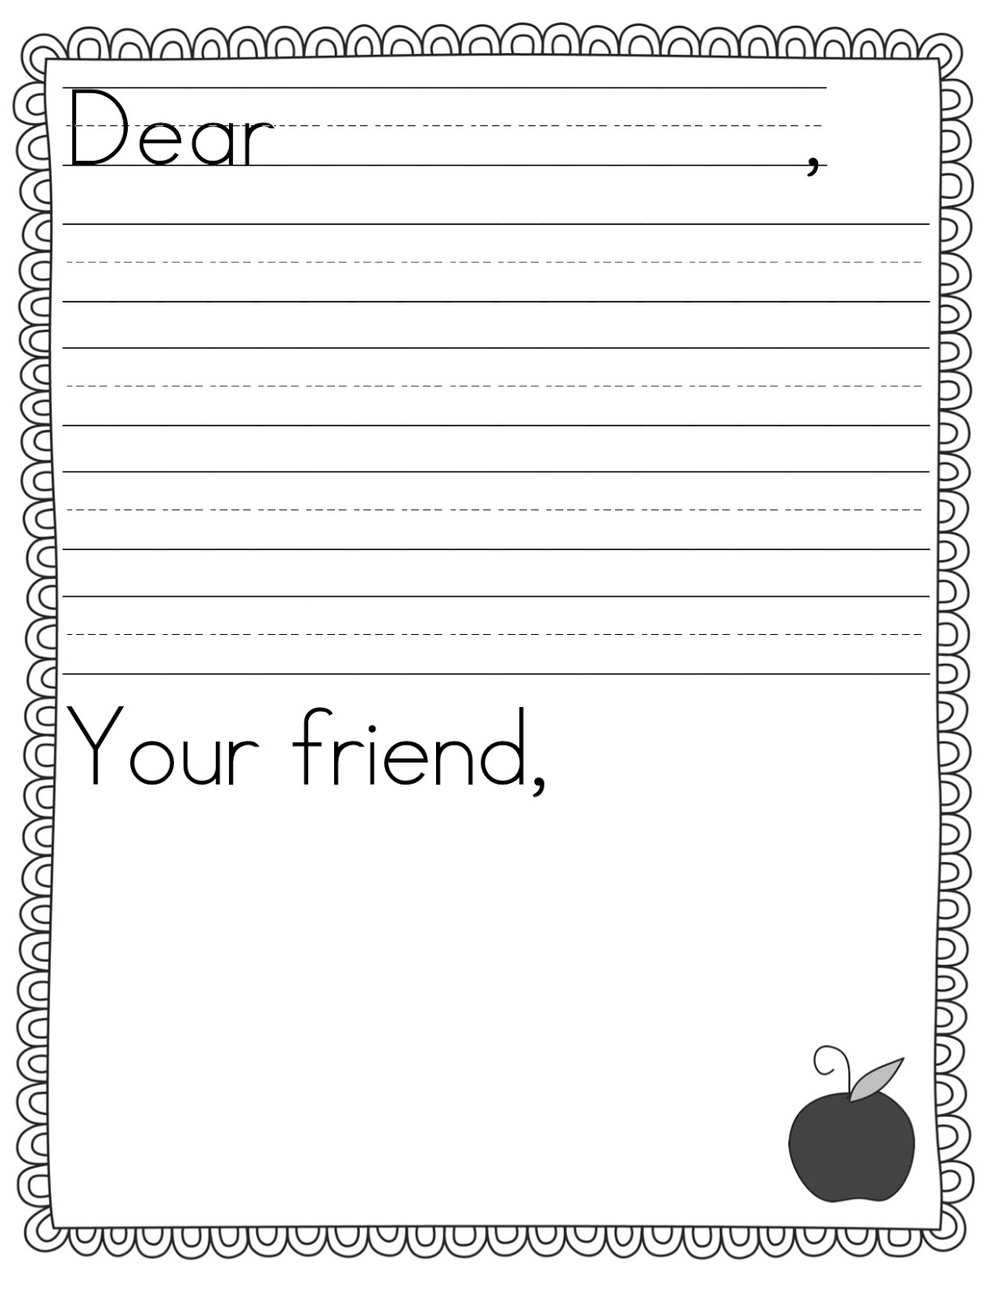 Kids Letter Writing Campaign — Urban Homestead Foundation With Blank Letter Writing Template For Kids